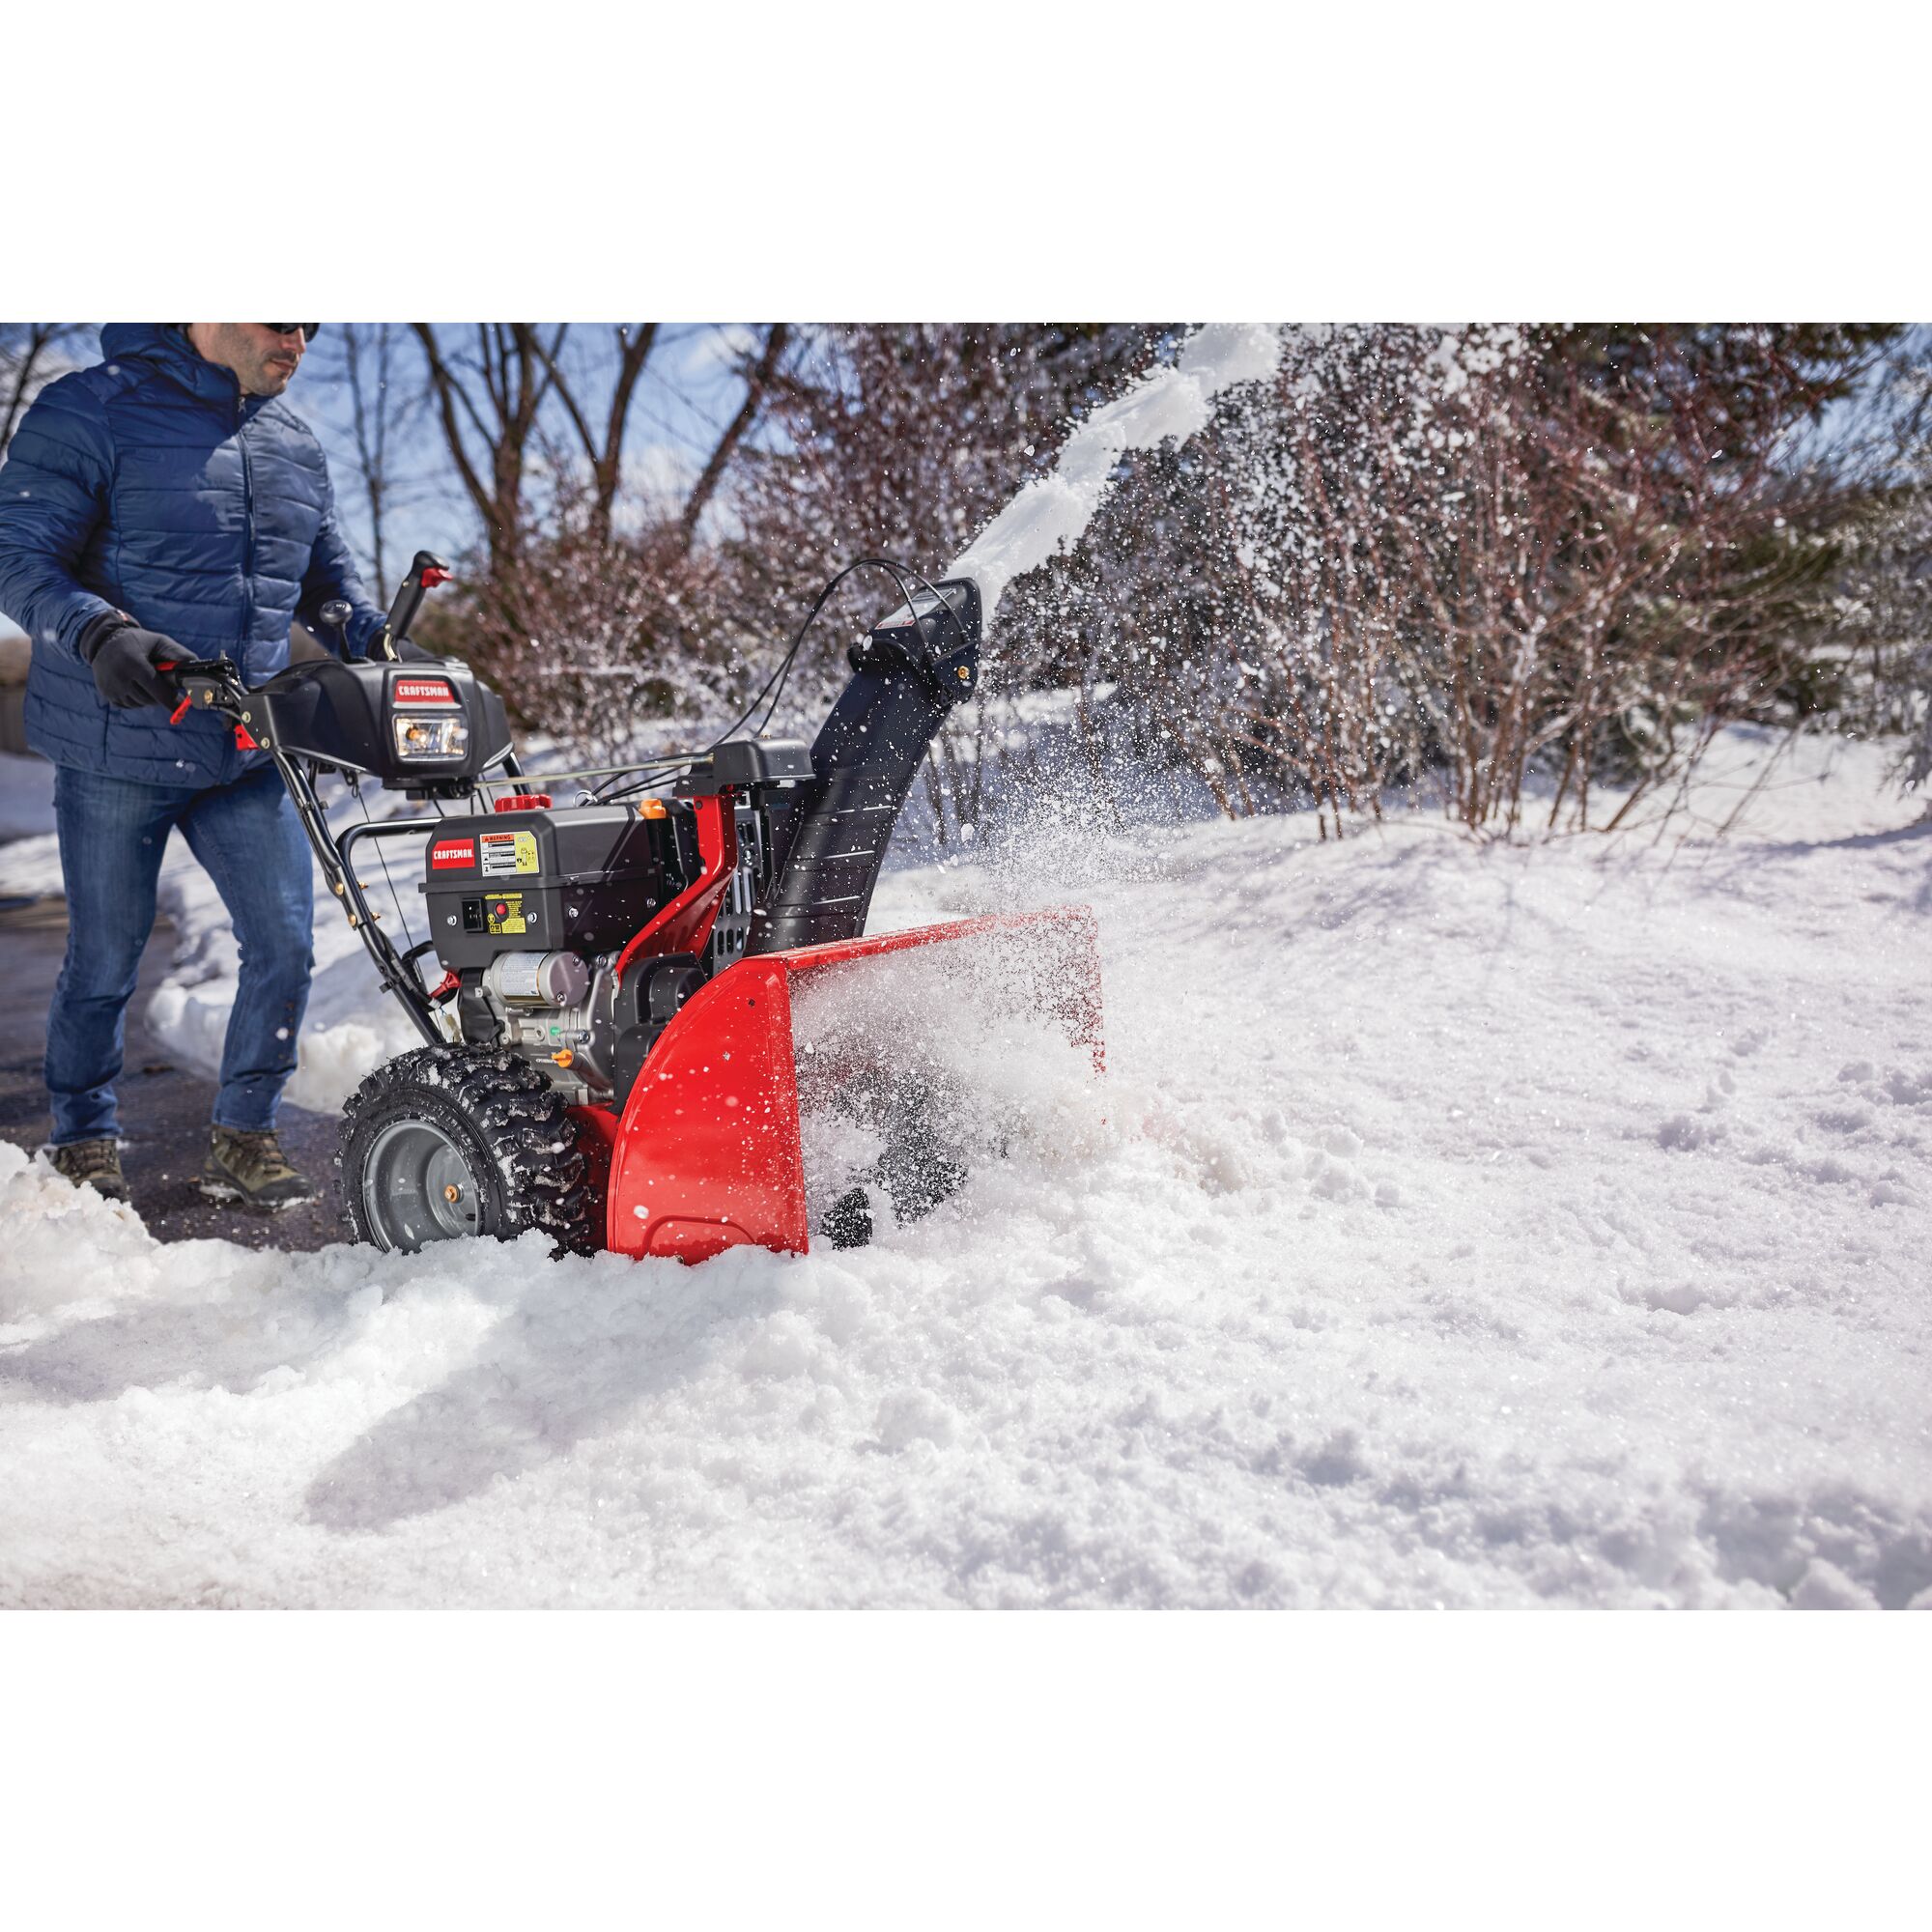 CRAFTSMAN Electric Start 3-Stage Snow Blower blowing the snow off a sidewalk in a yard in side view in blue jacket